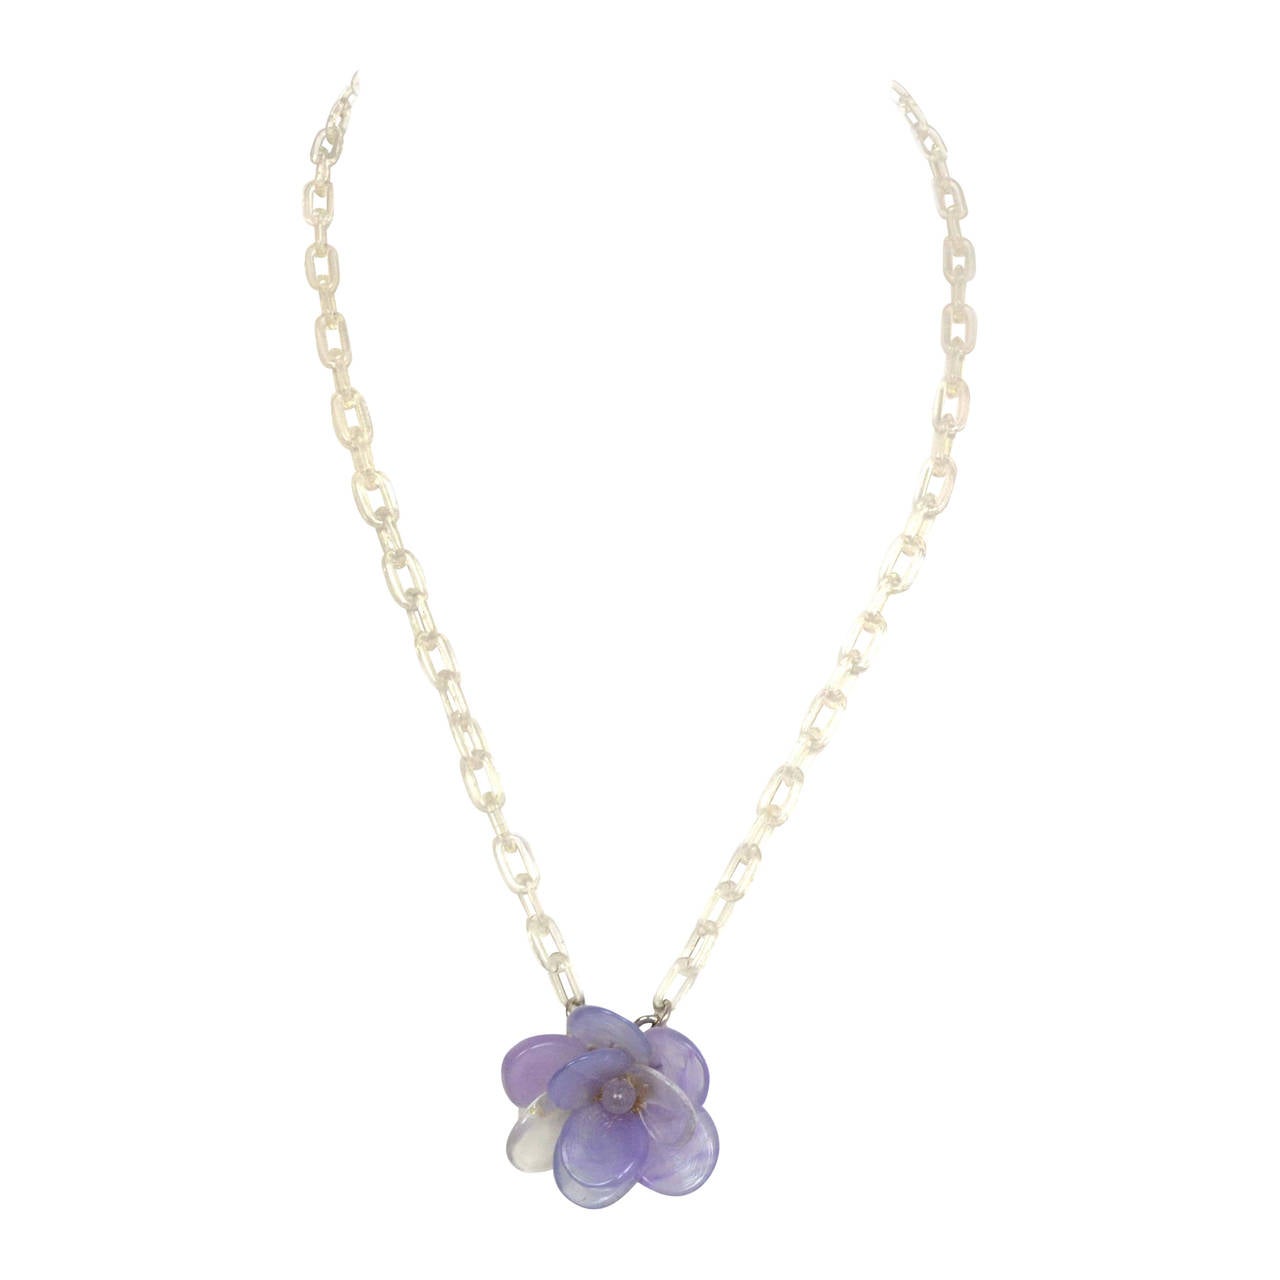 Chanel Lavender Glass Flower & Clear Resin Chain Link Necklace
Features large clear resin CC pendant at back neck closure
Made in: France
Year of Production: 2001
Stamp: 01 CC P
Closure: Hook Closure
Color: Lavender and